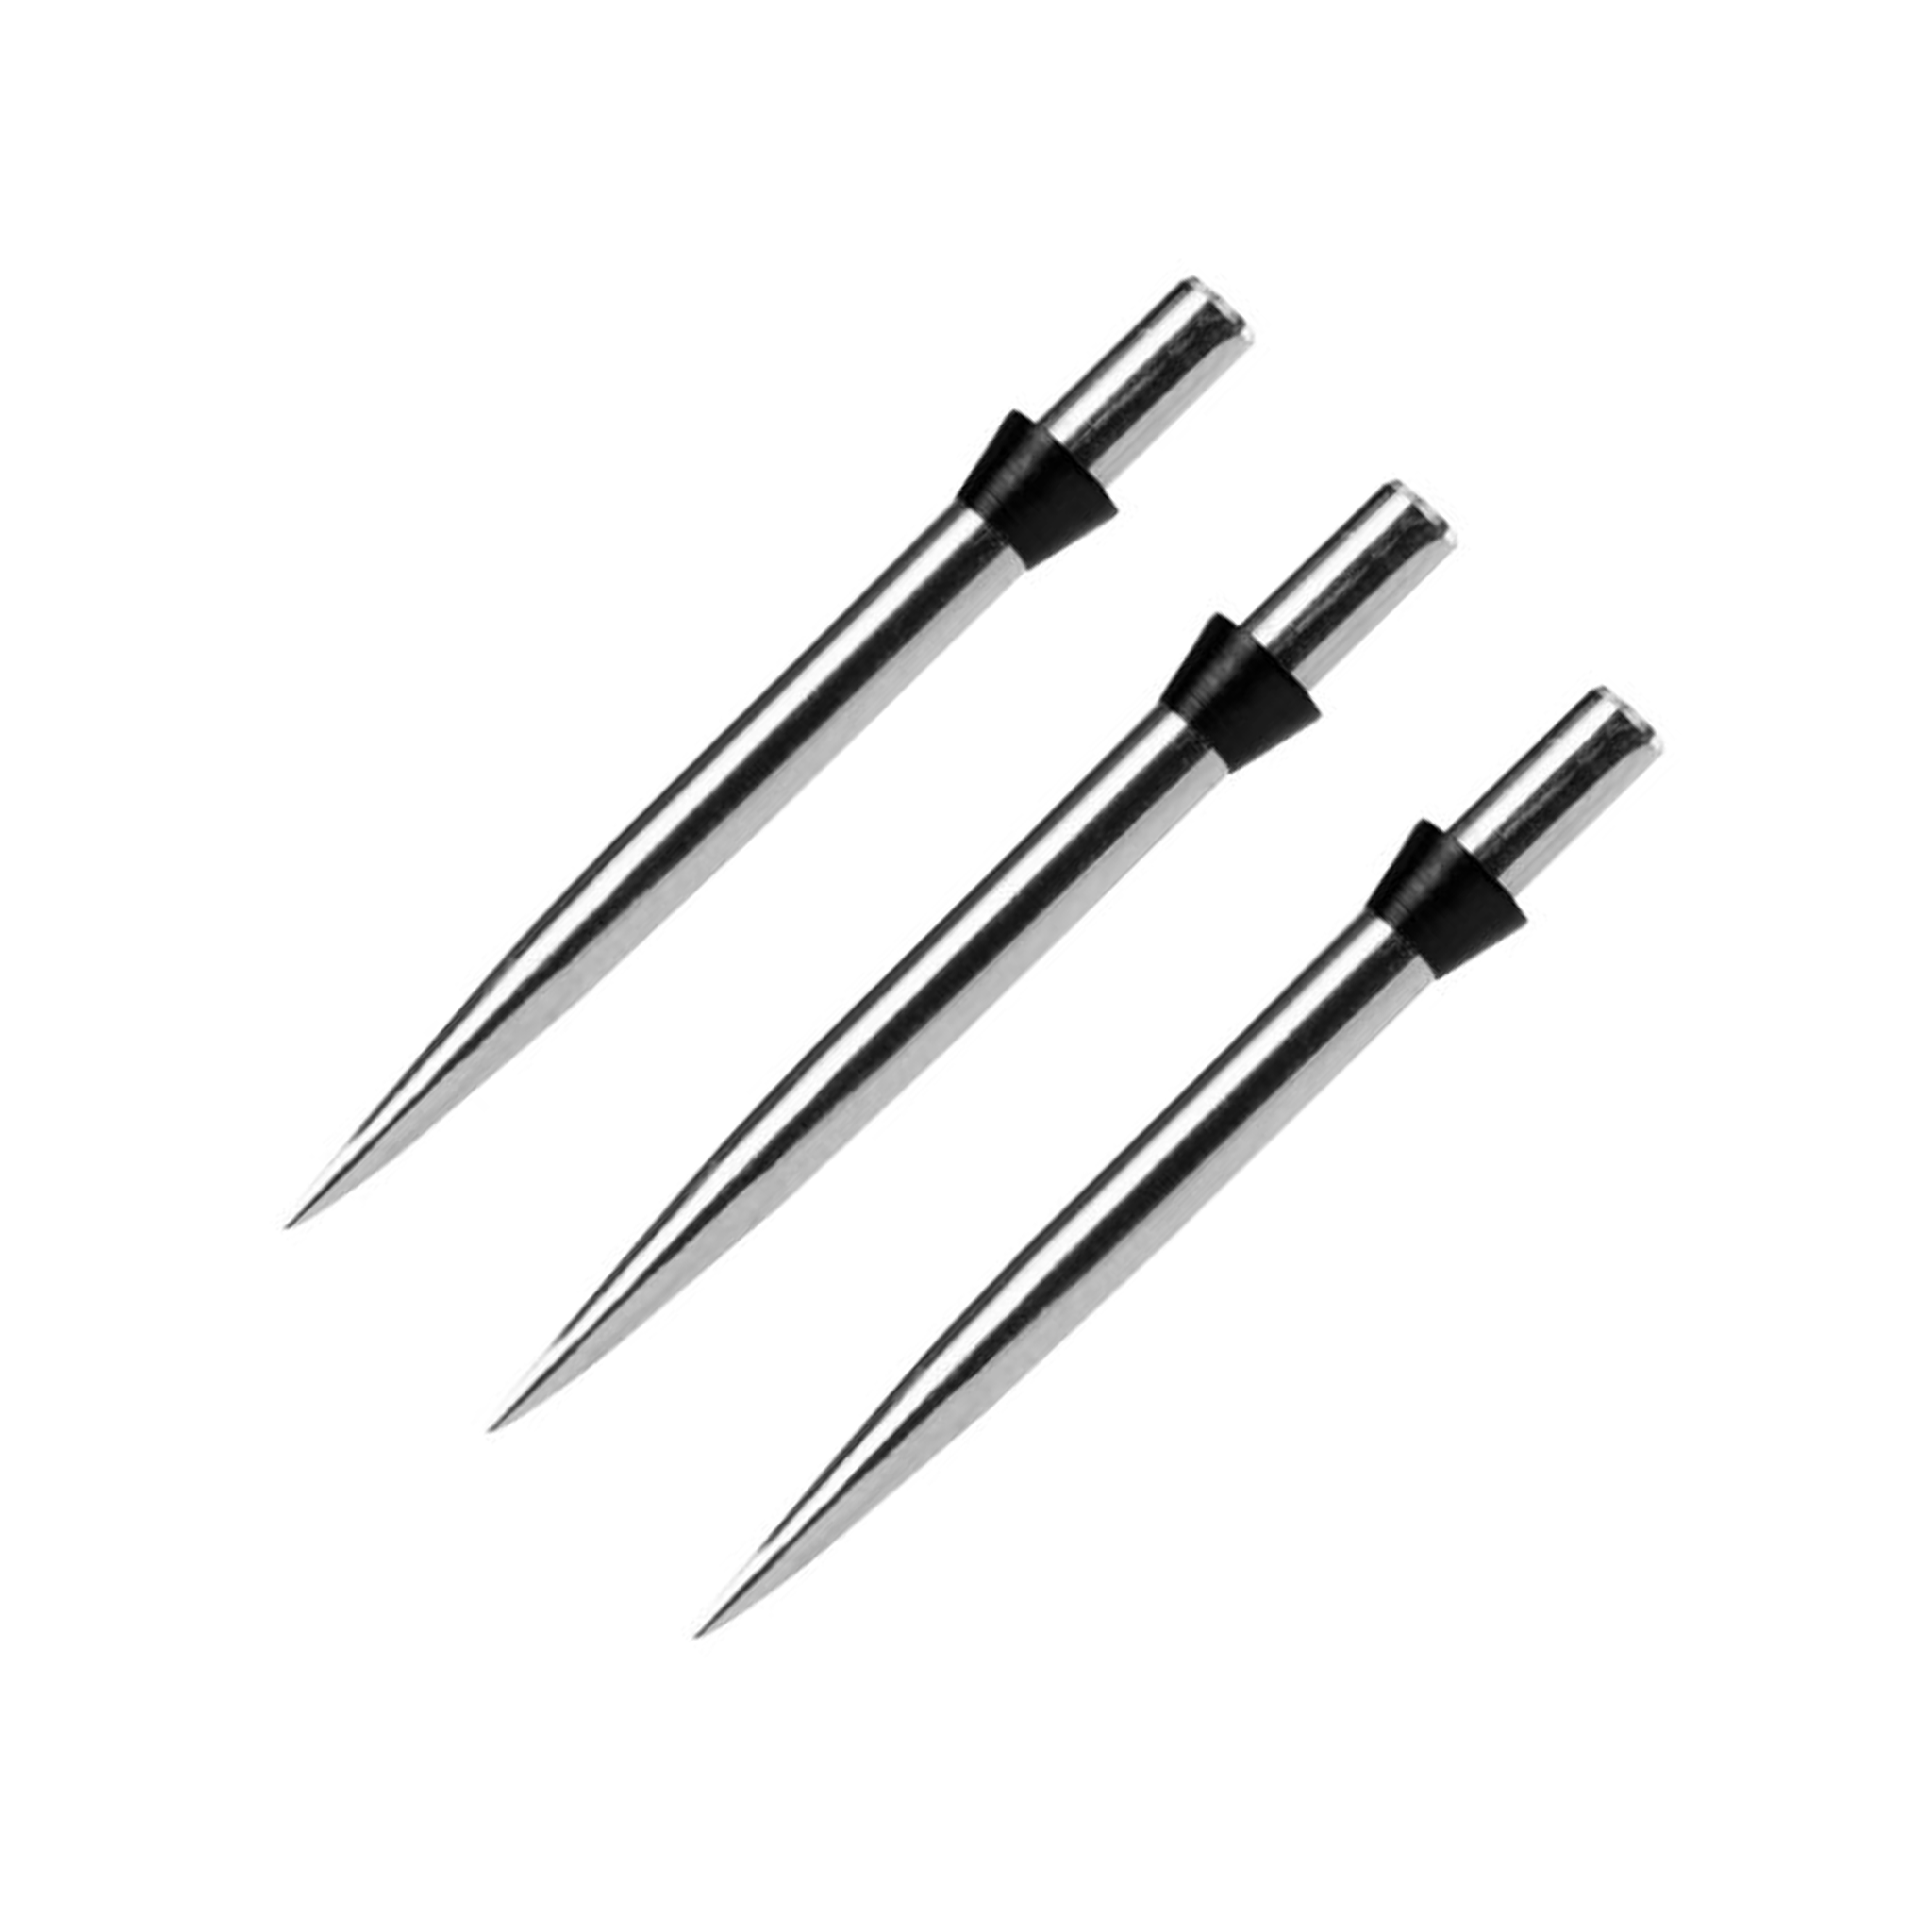 Red Dragon Trident - Dart Points 32mm / Silver & Black Accessories